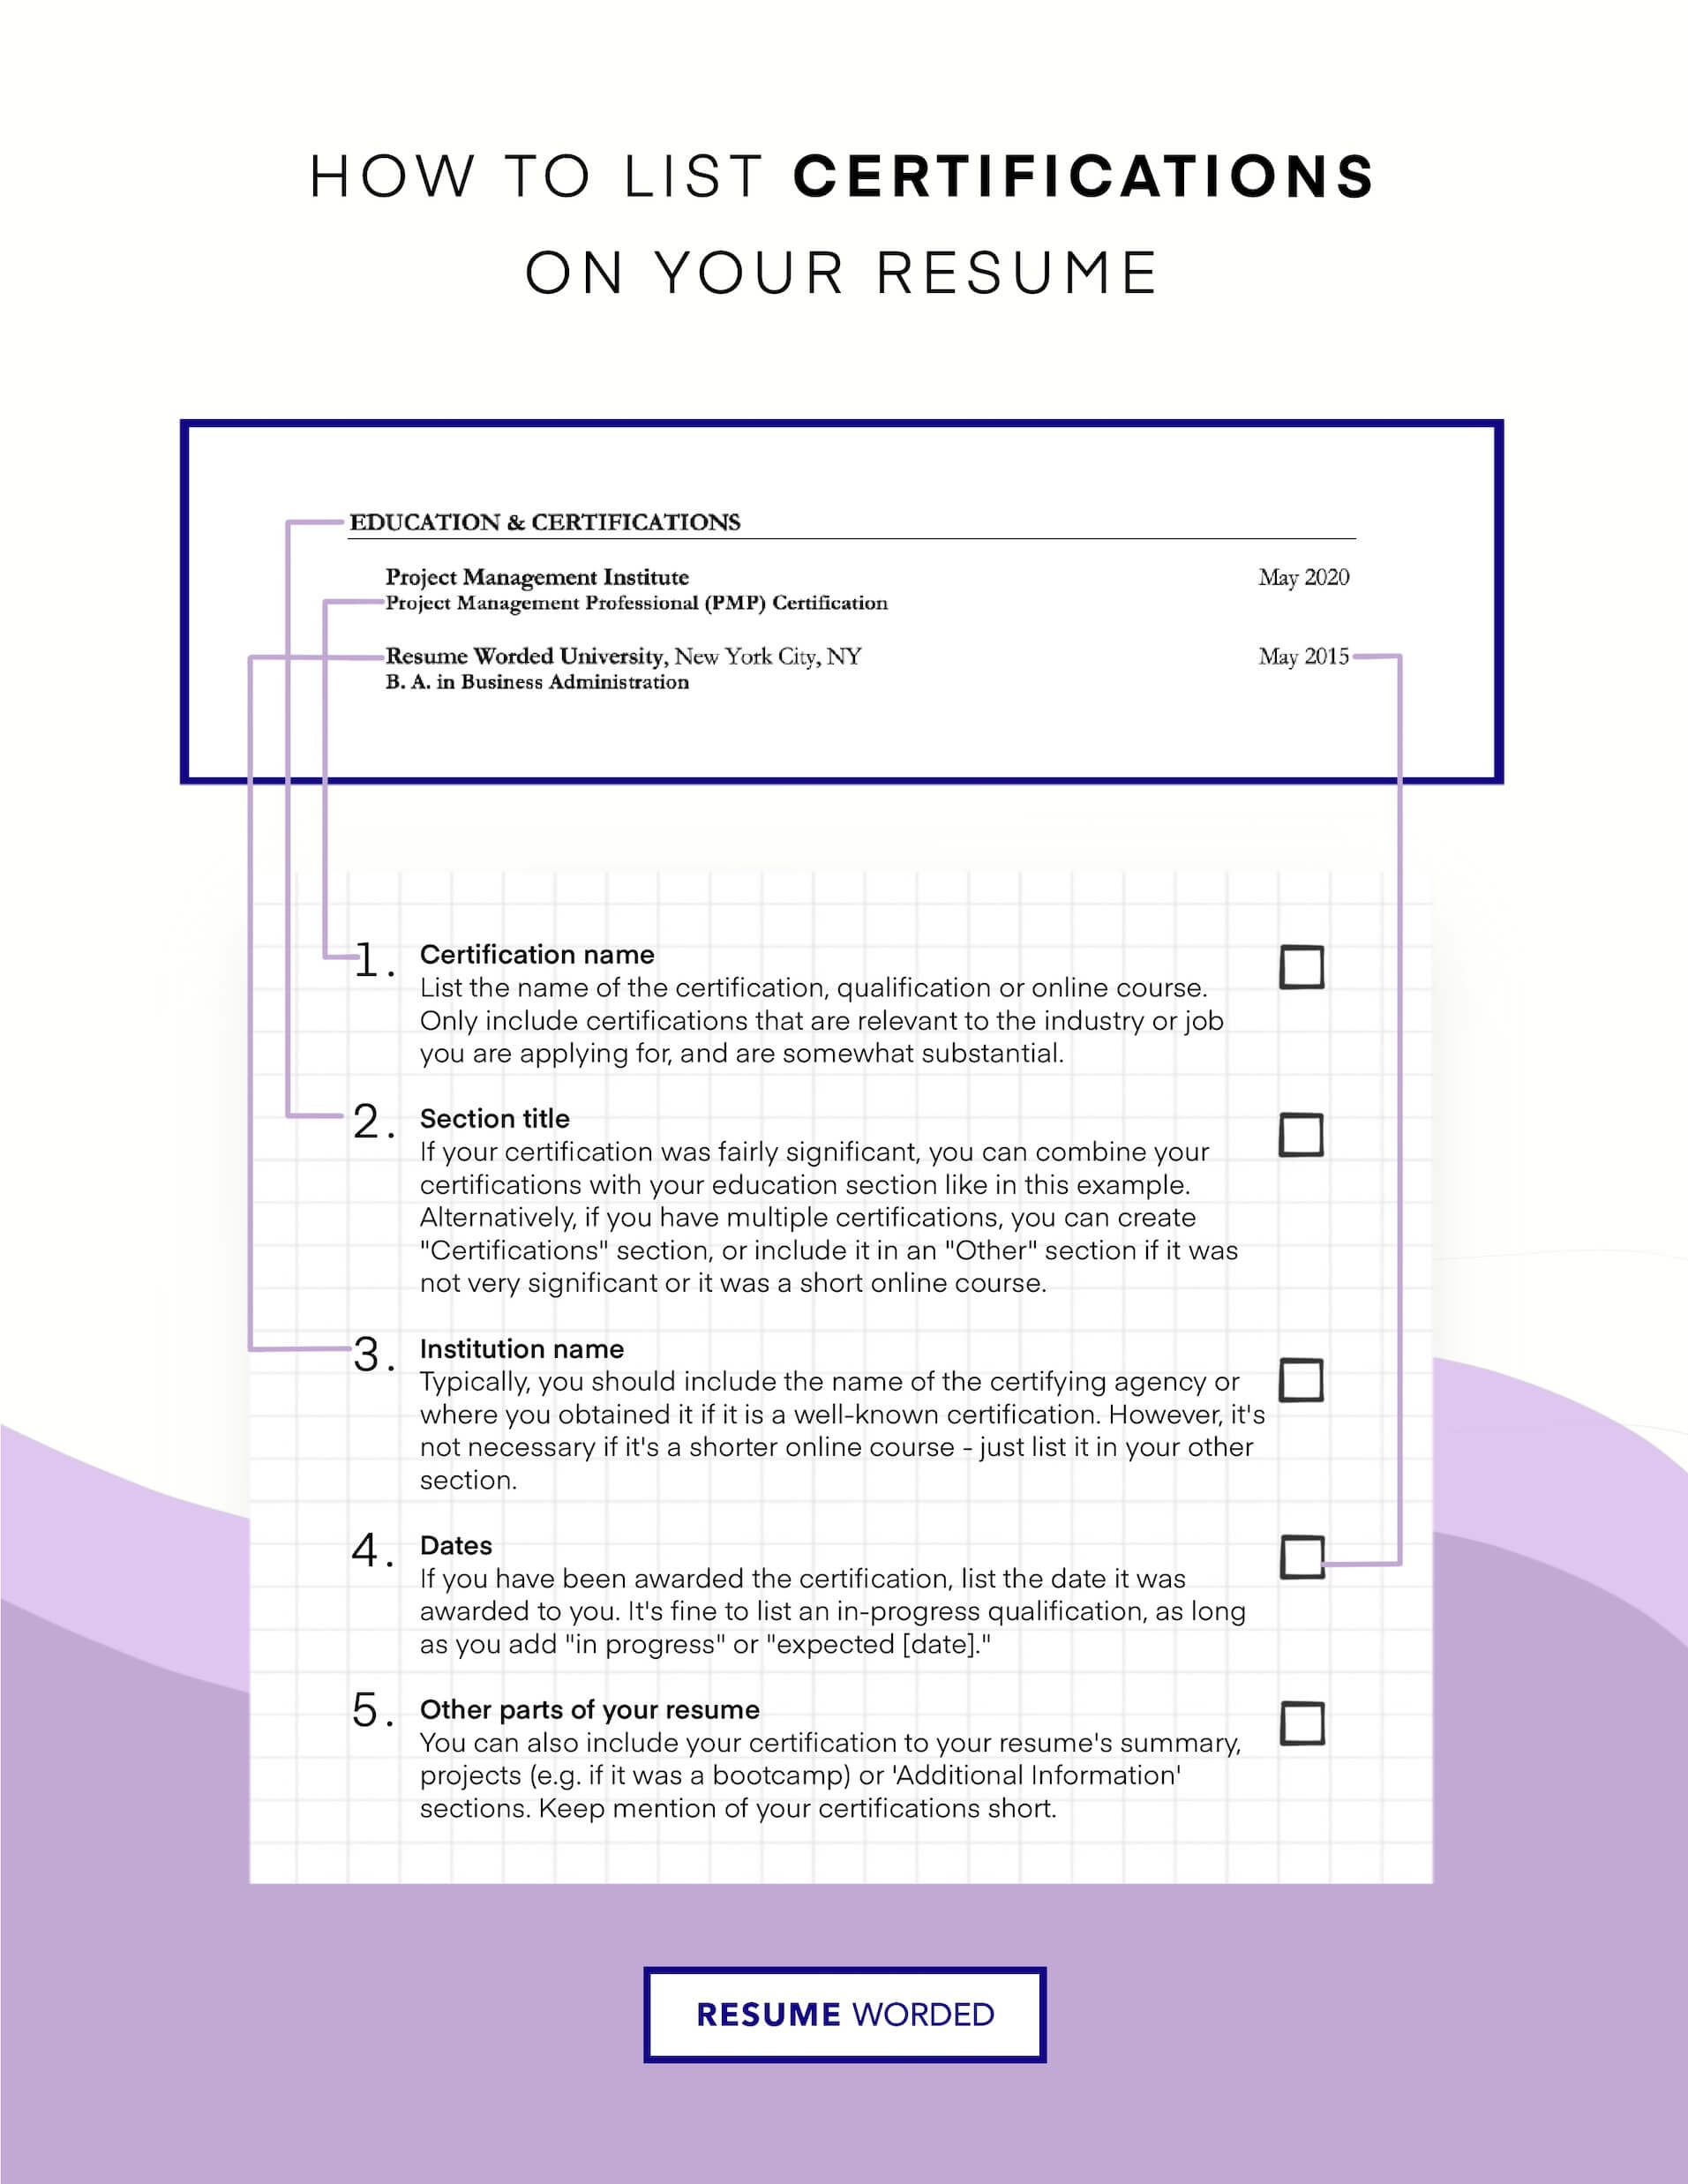 Include your sales-related certifications. - Sales Coordinator Resume